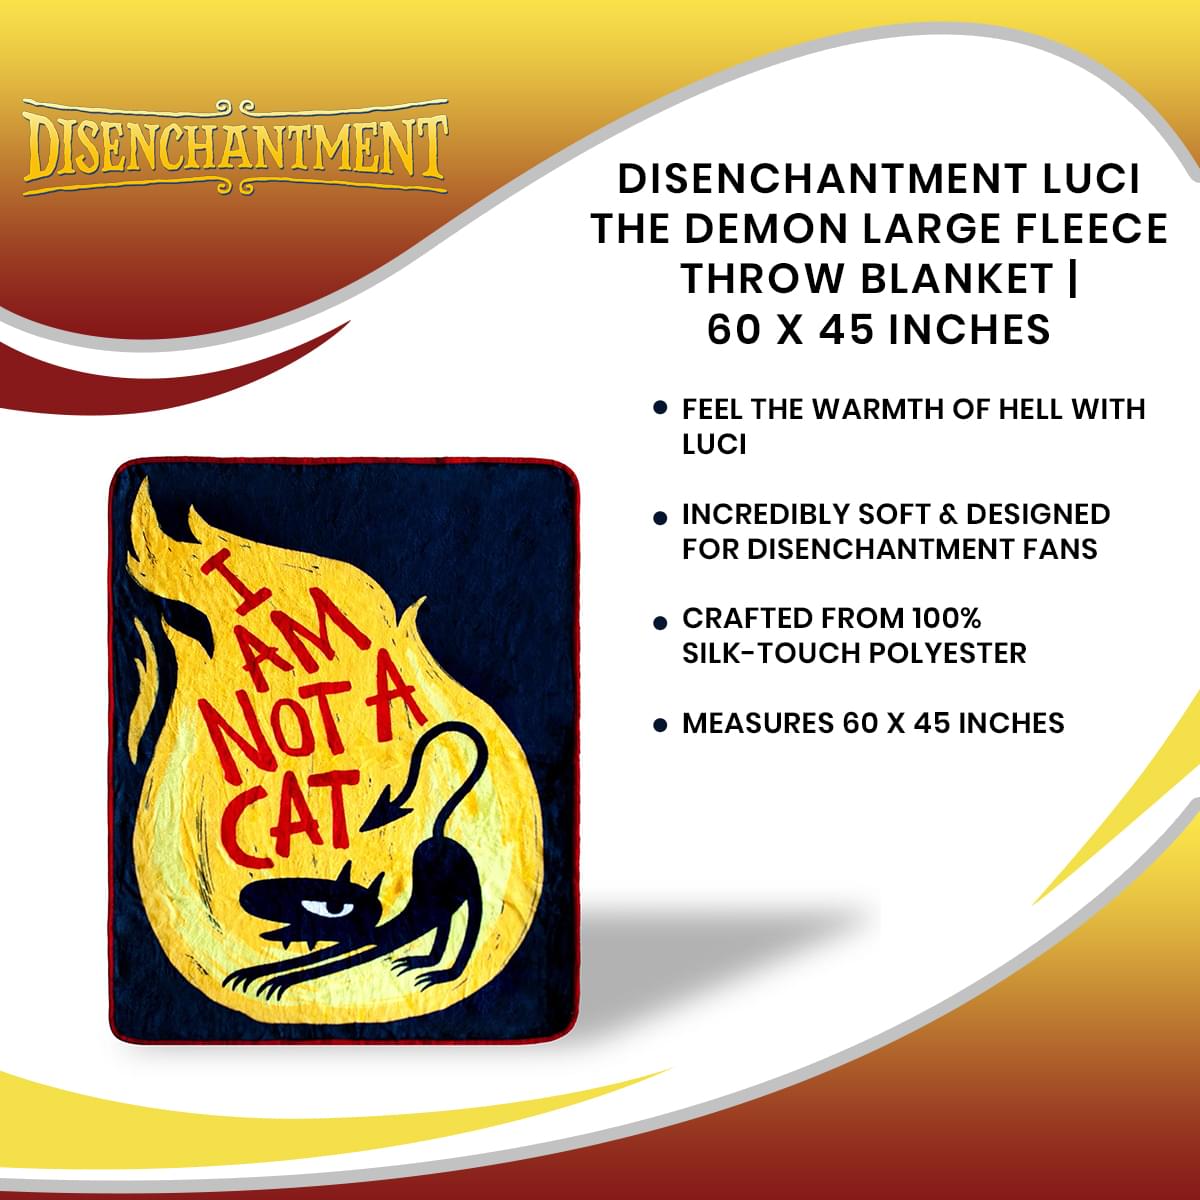 Disenchantment Luci The Demon Large Fleece Throw Blanket | 60 x 45 Inches